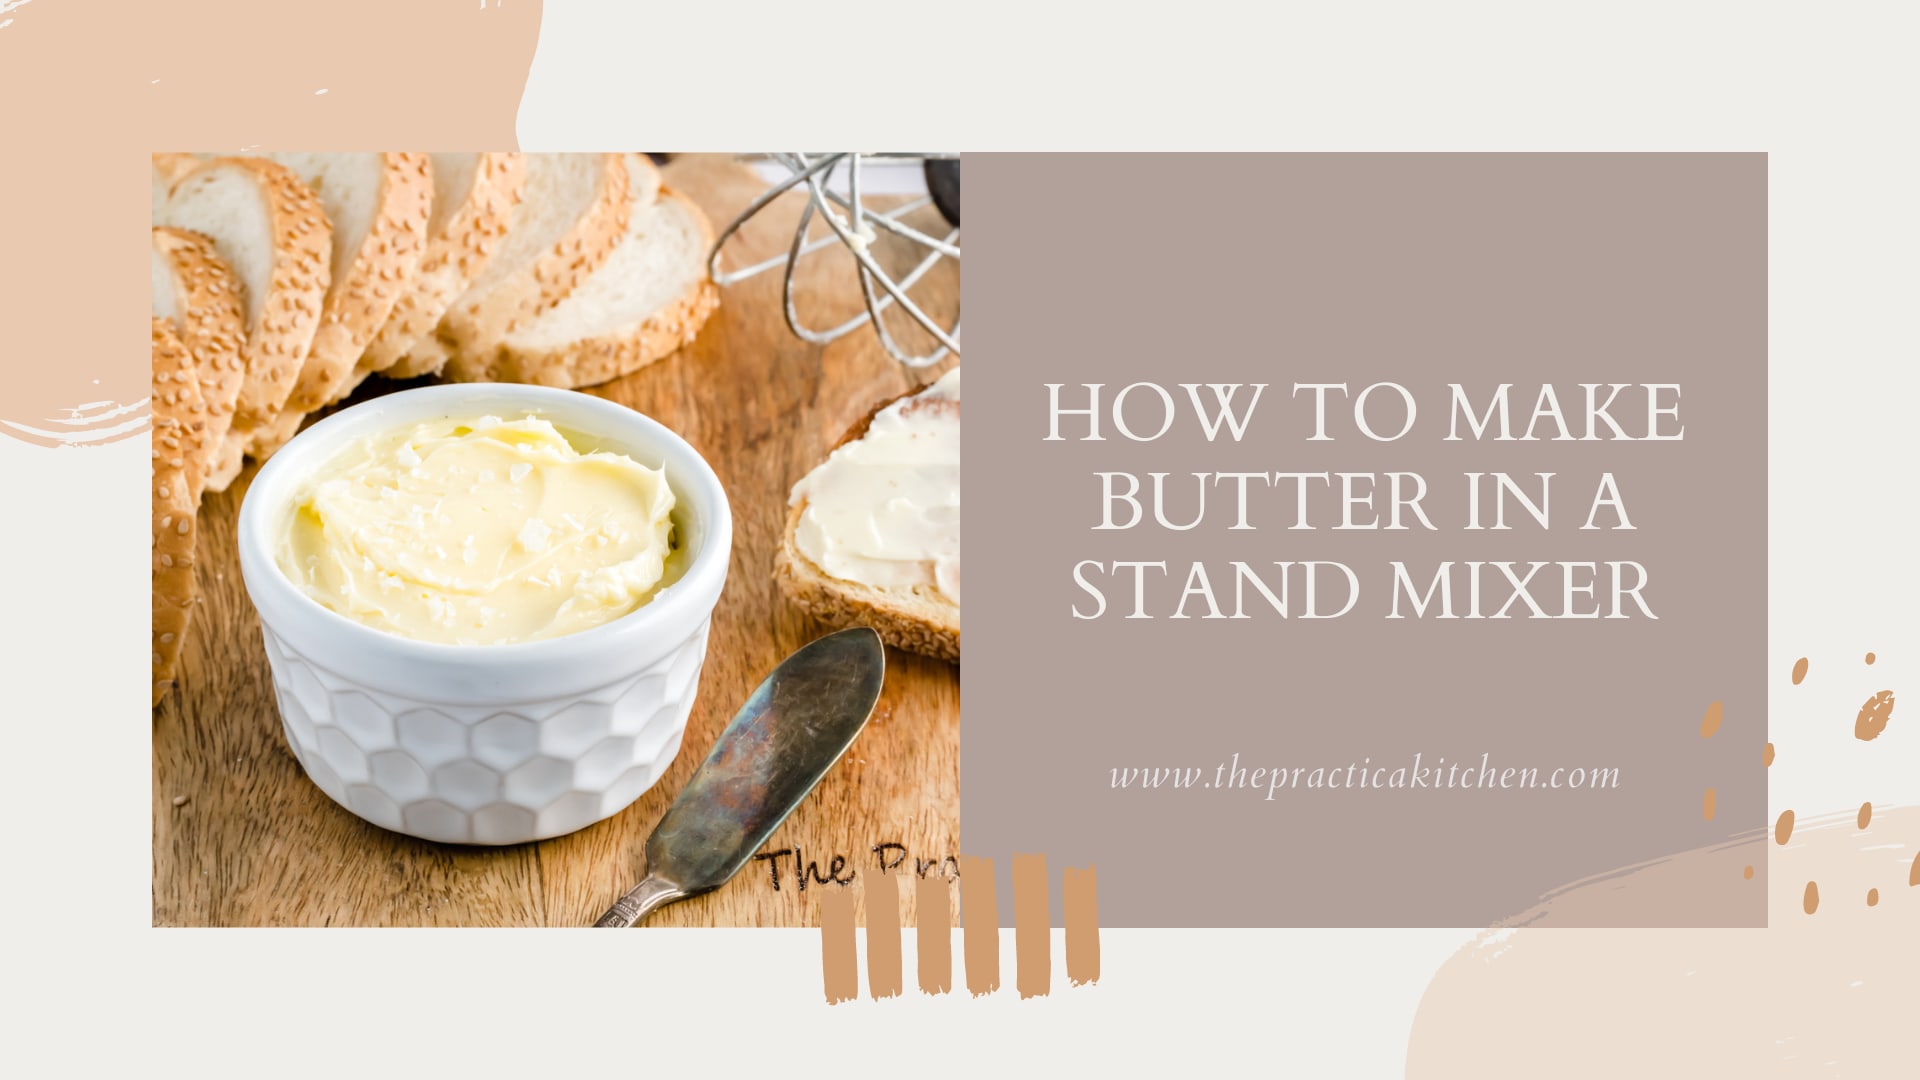 Homemade Butter in 5 Minutes Using KitchenAid Stand Mixer - Aaichi Savali